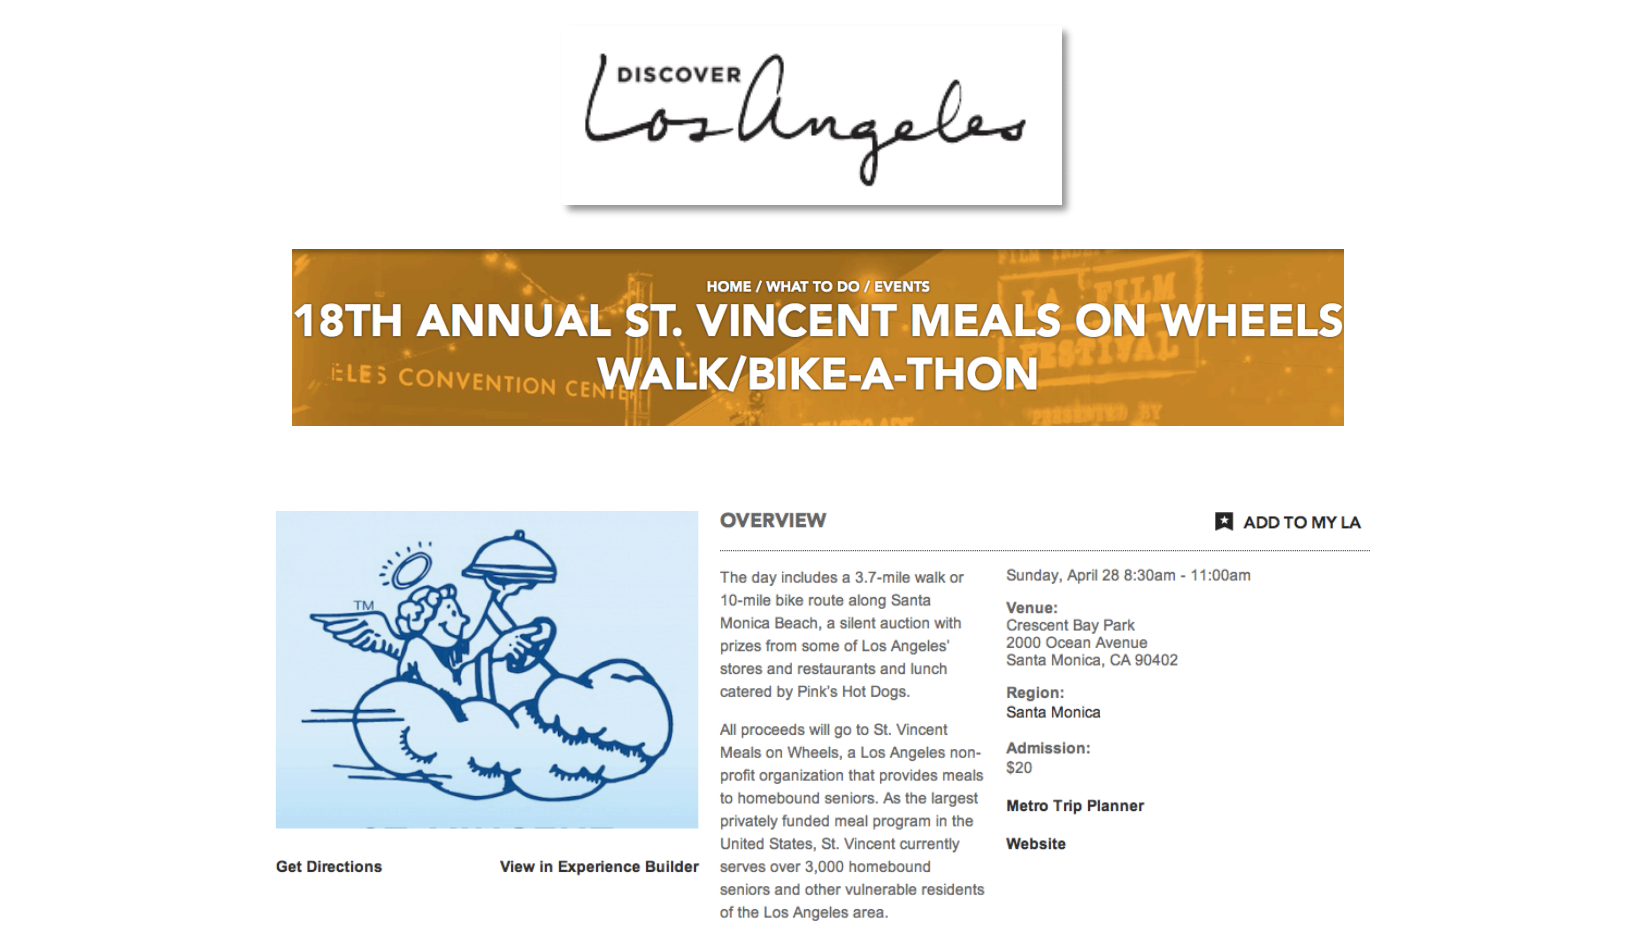   The mission of St. Vincent Meals on Wheels is to prepare and deliver nutritious meals to homebound seniors and other vulnerable residents across Los Angeles.  